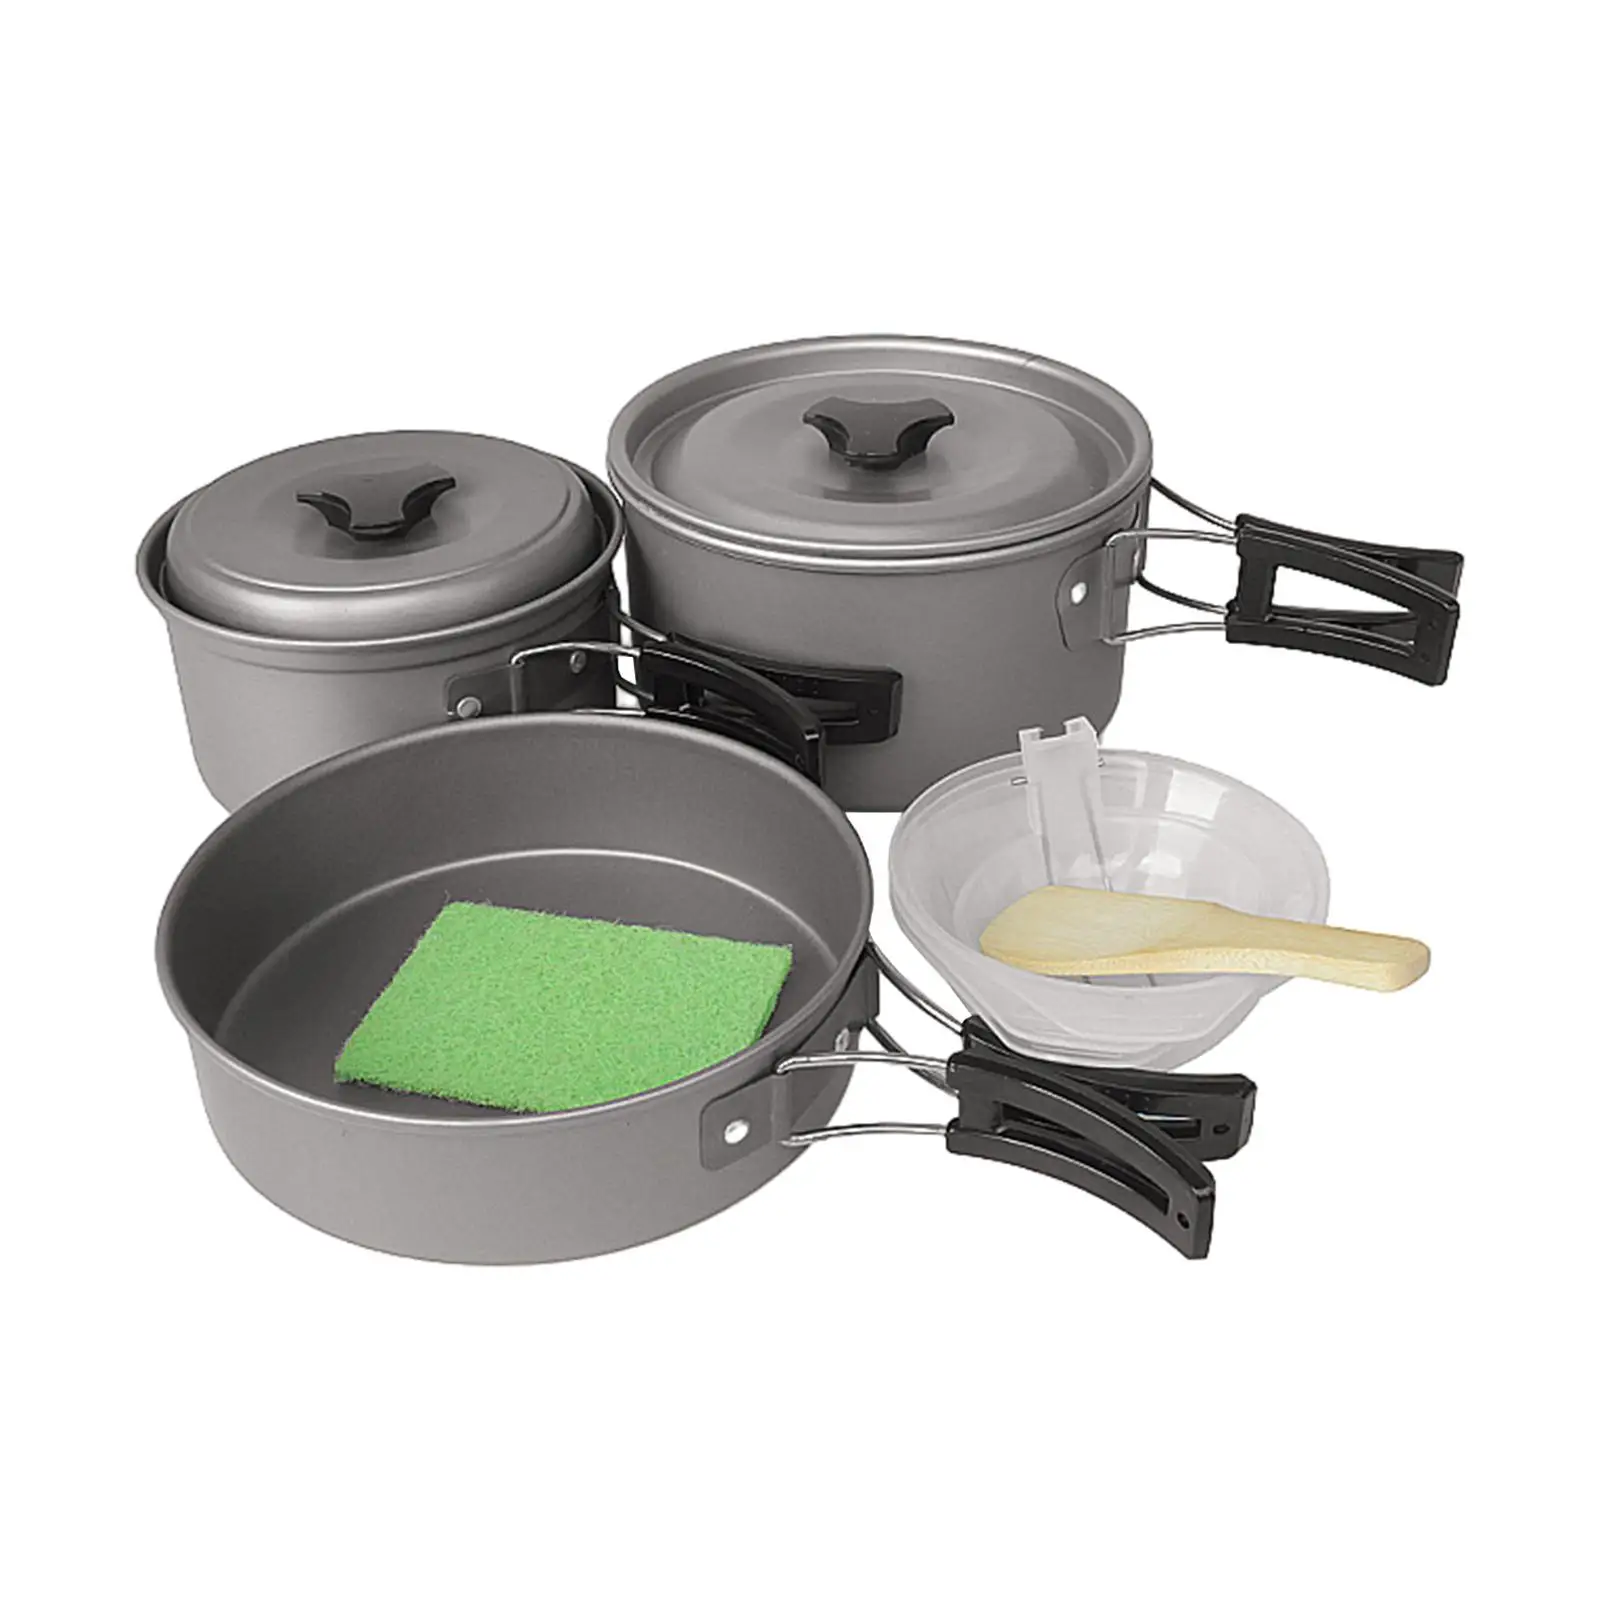 Camping Cookware Set for Campfire Compact with Bowls with Folding Handles Frying